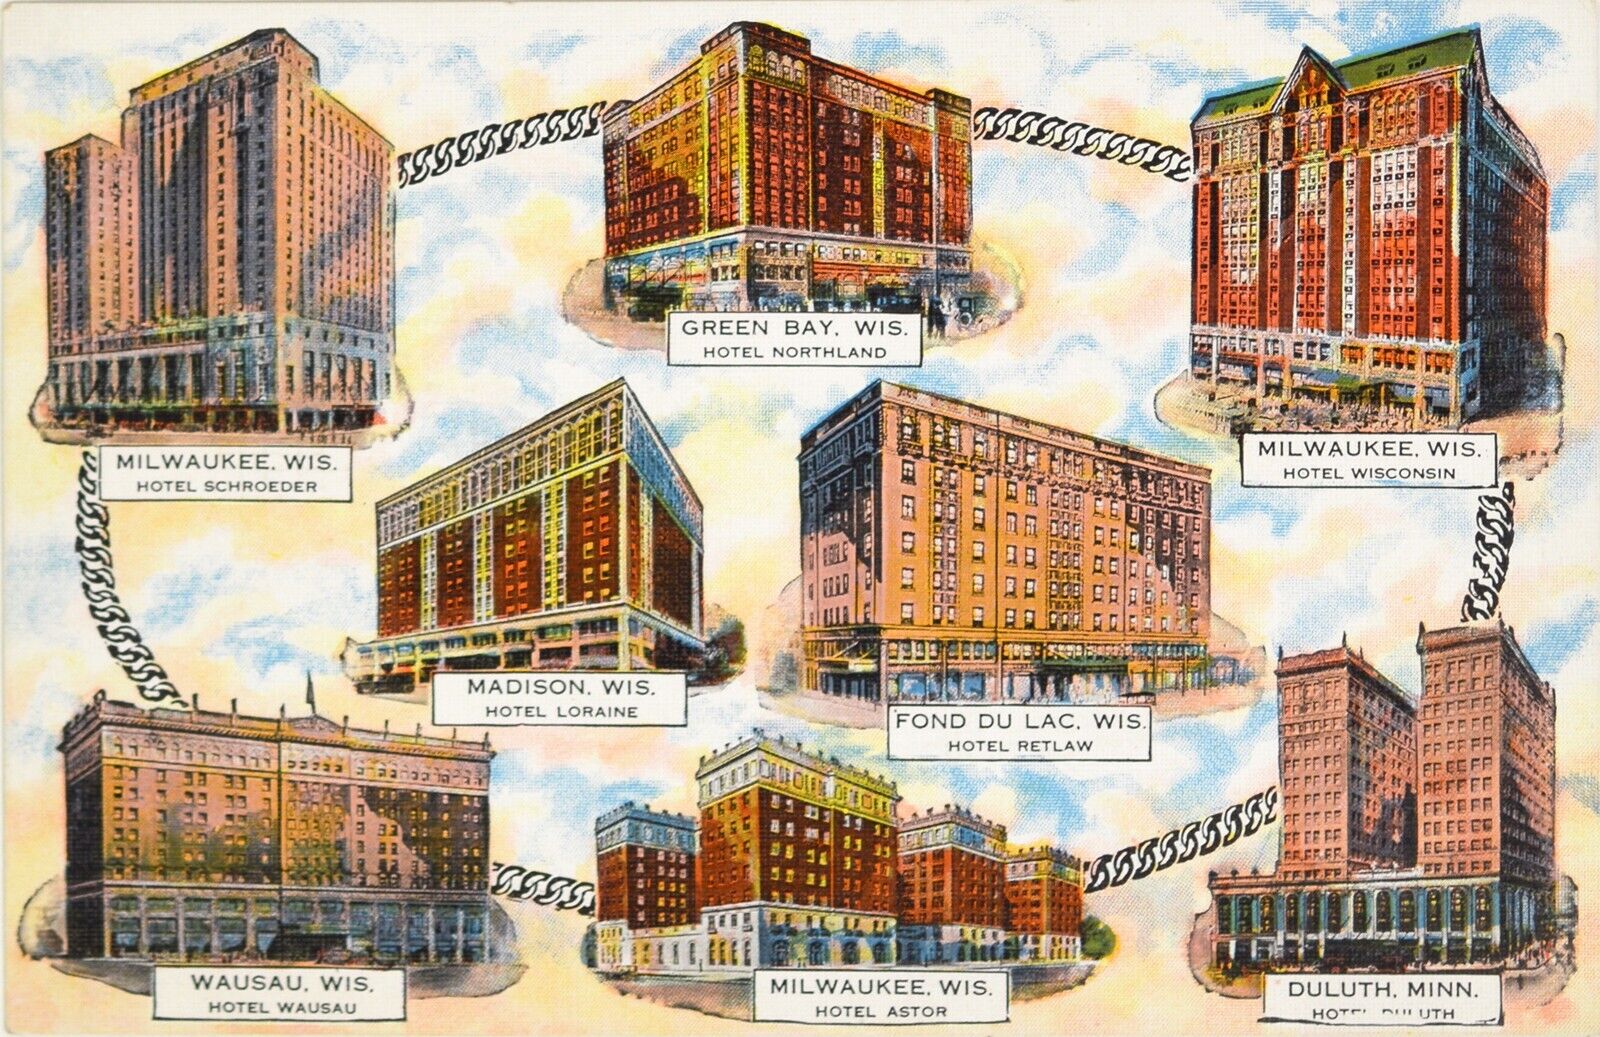 BUILDINGS (ADVERTISING) FROM MILWAUKEE WISCONSIN MULTI-VIEW POSTCARD 1930-1945